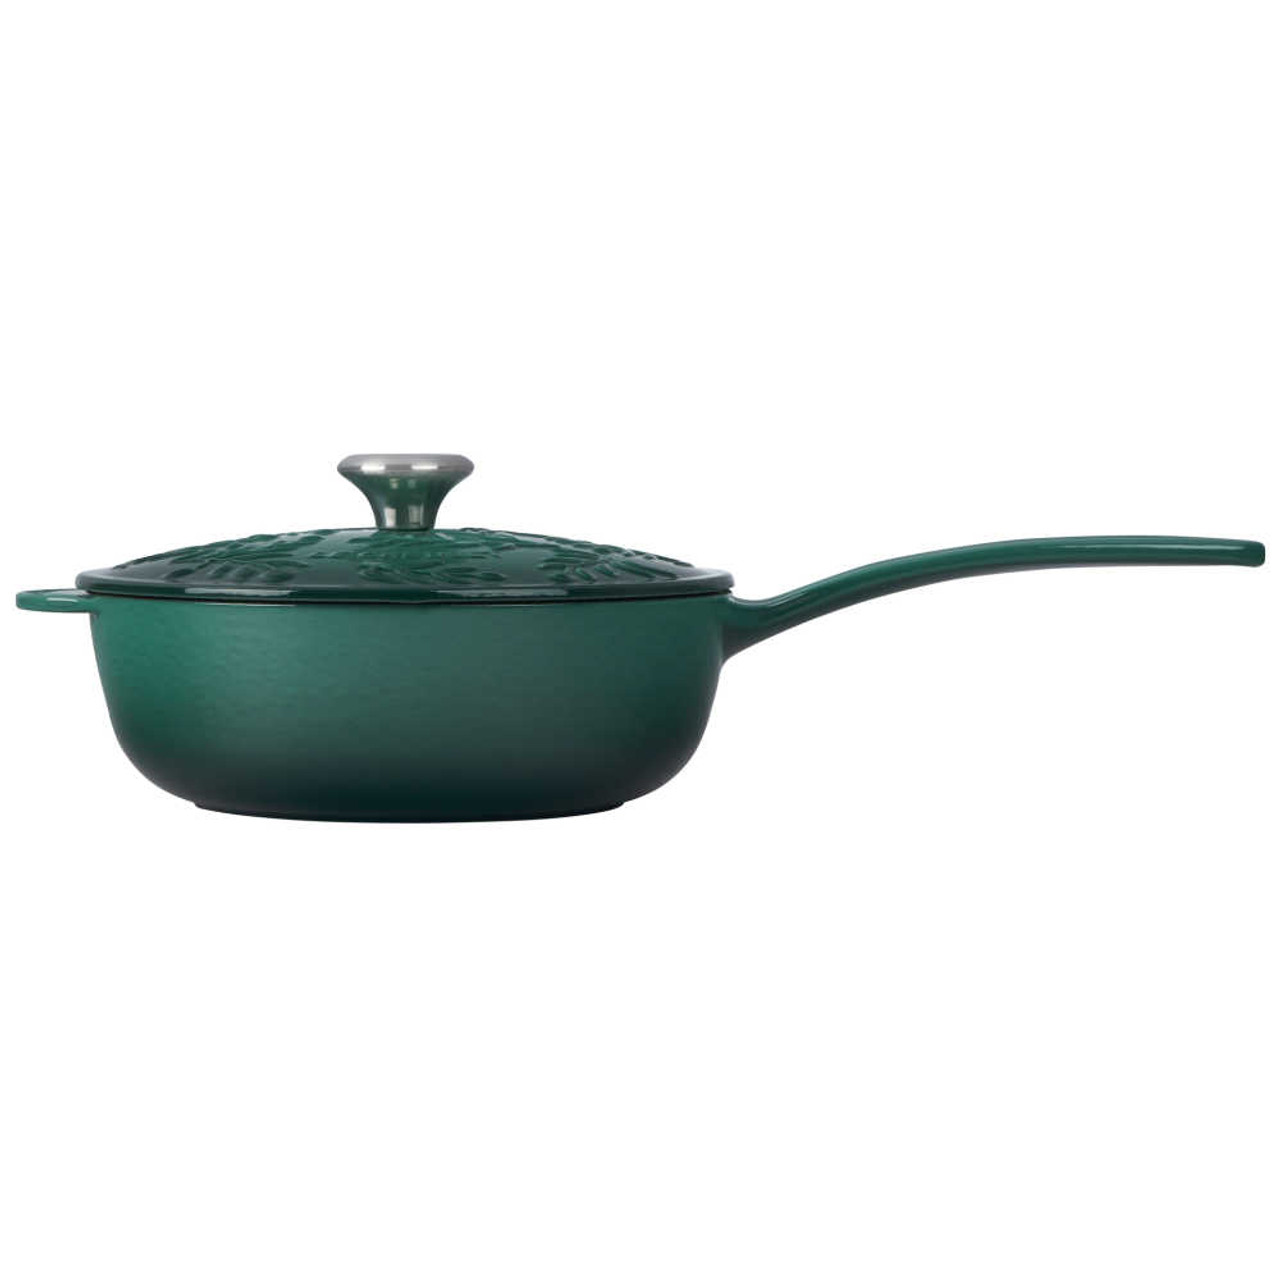 https://cdn11.bigcommerce.com/s-hccytny0od/images/stencil/1280x1280/products/5502/24027/Le_Creuset_Olive_Branch_Collection_Saucier_in_Artichaut_2__36806.1688654514.jpg?c=2?imbypass=on